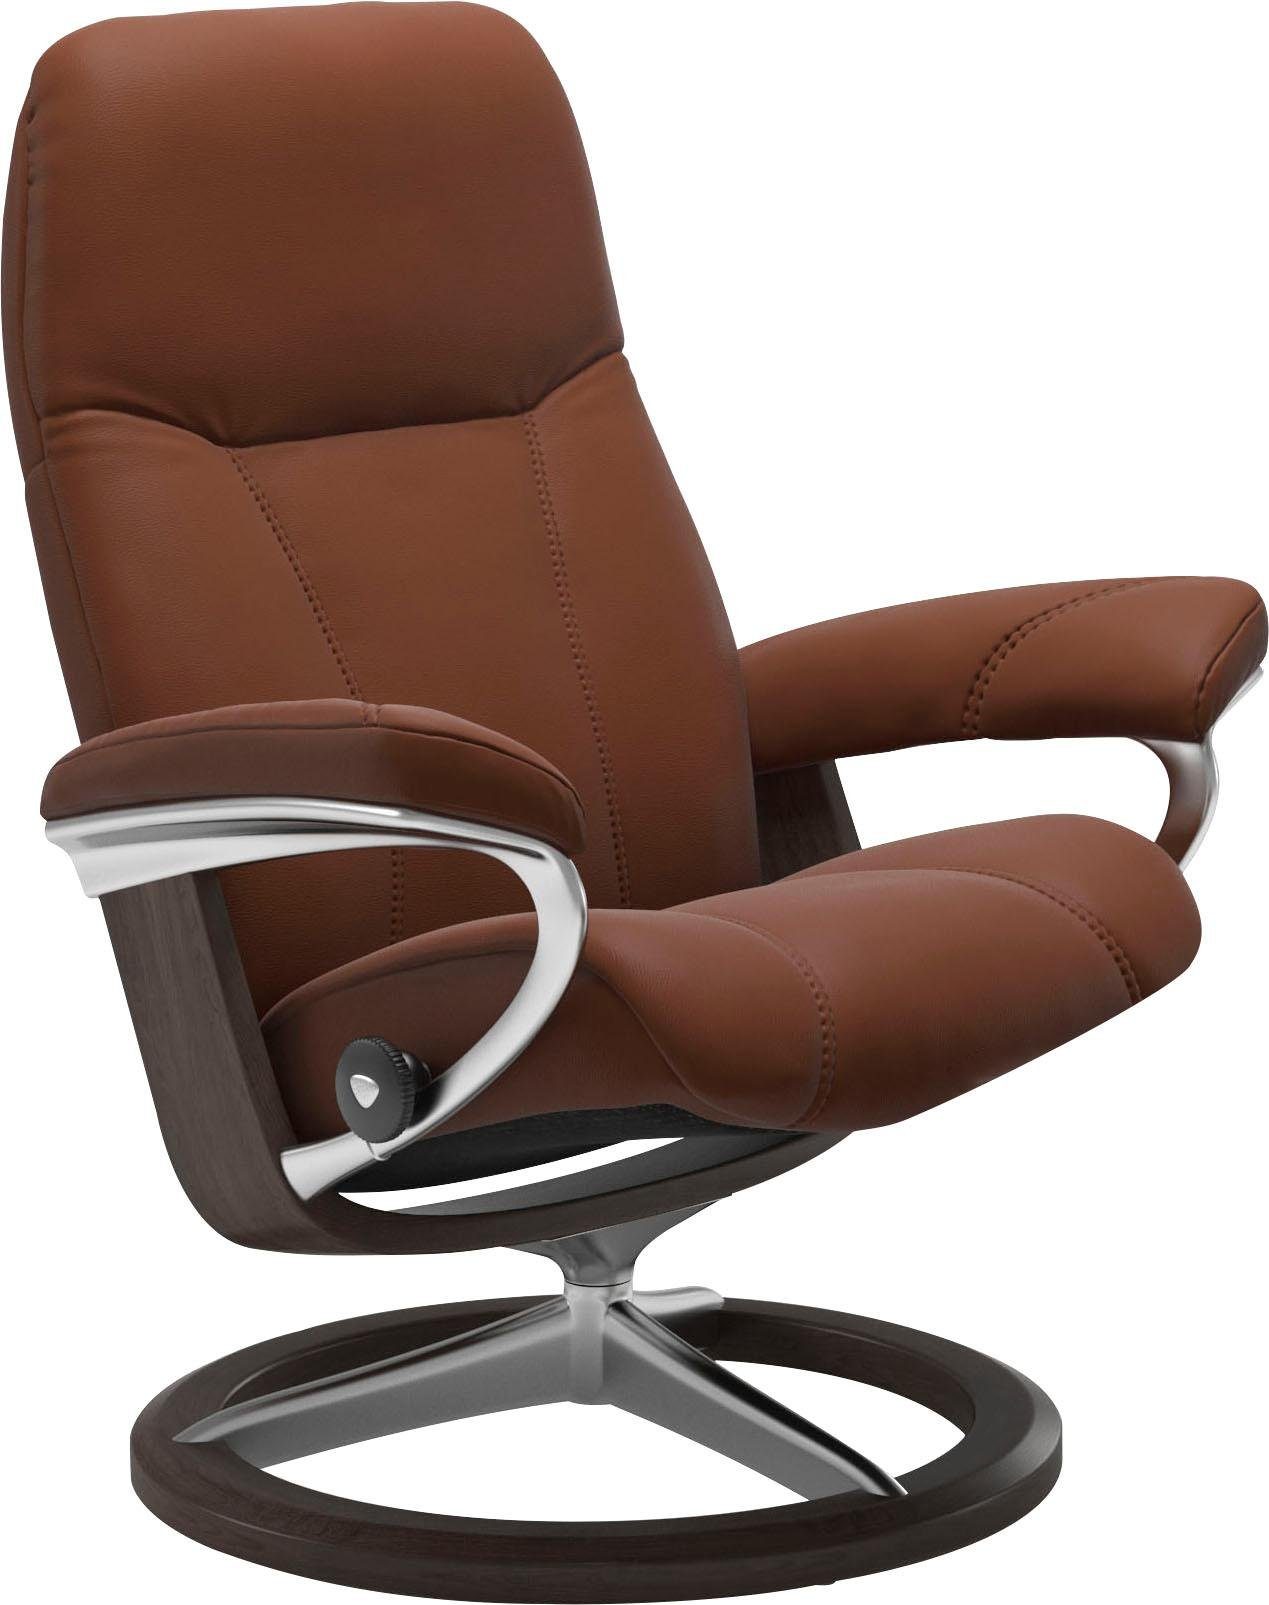 Base, Gestell Consul, mit Relaxsessel Signature L, Stressless® Größe Wenge